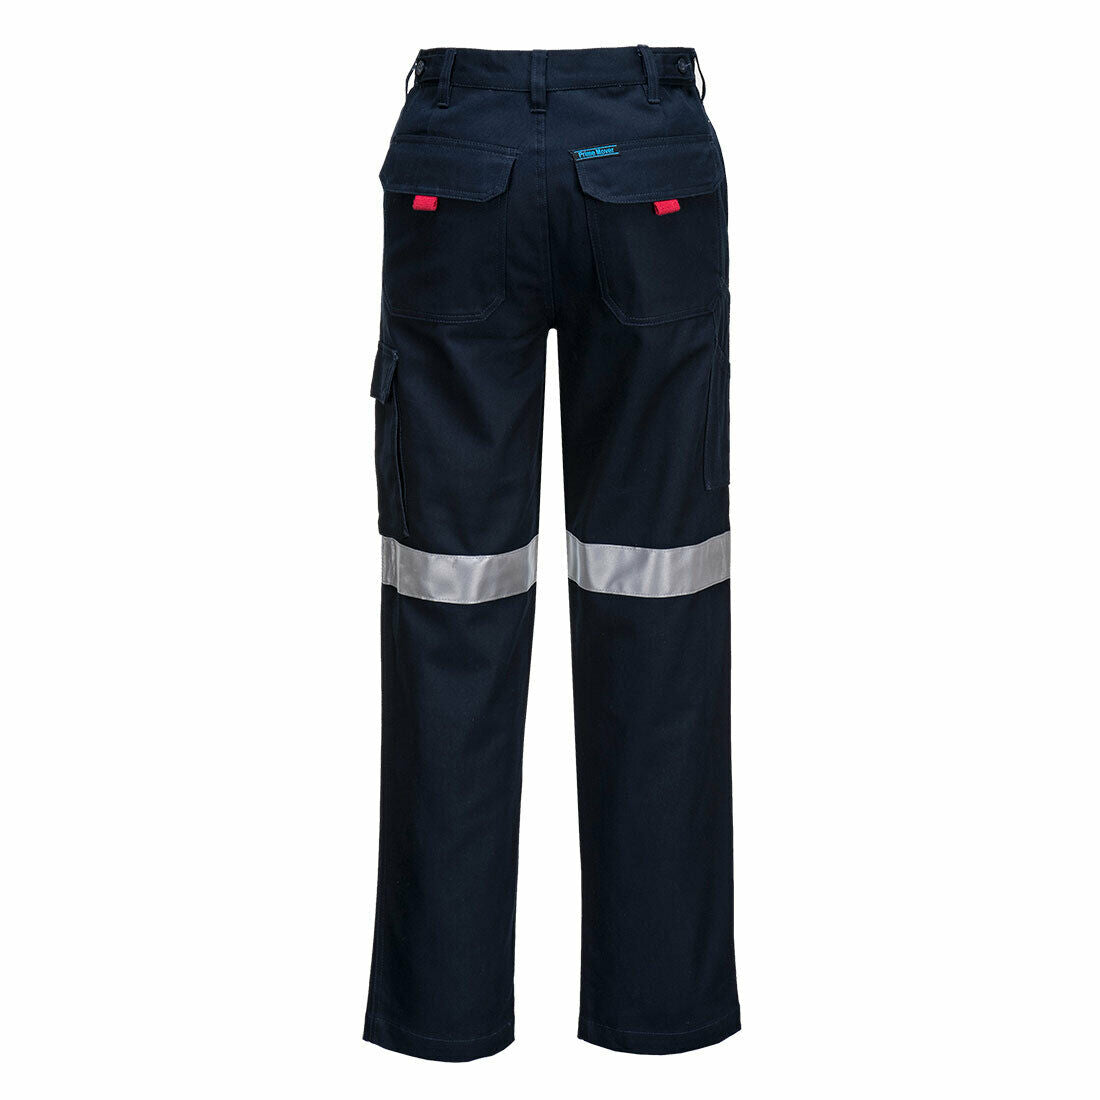 Portwest Mens Prime Mover Cargo Pants Taped Cotton Pre Shrunk Work Safety MP701